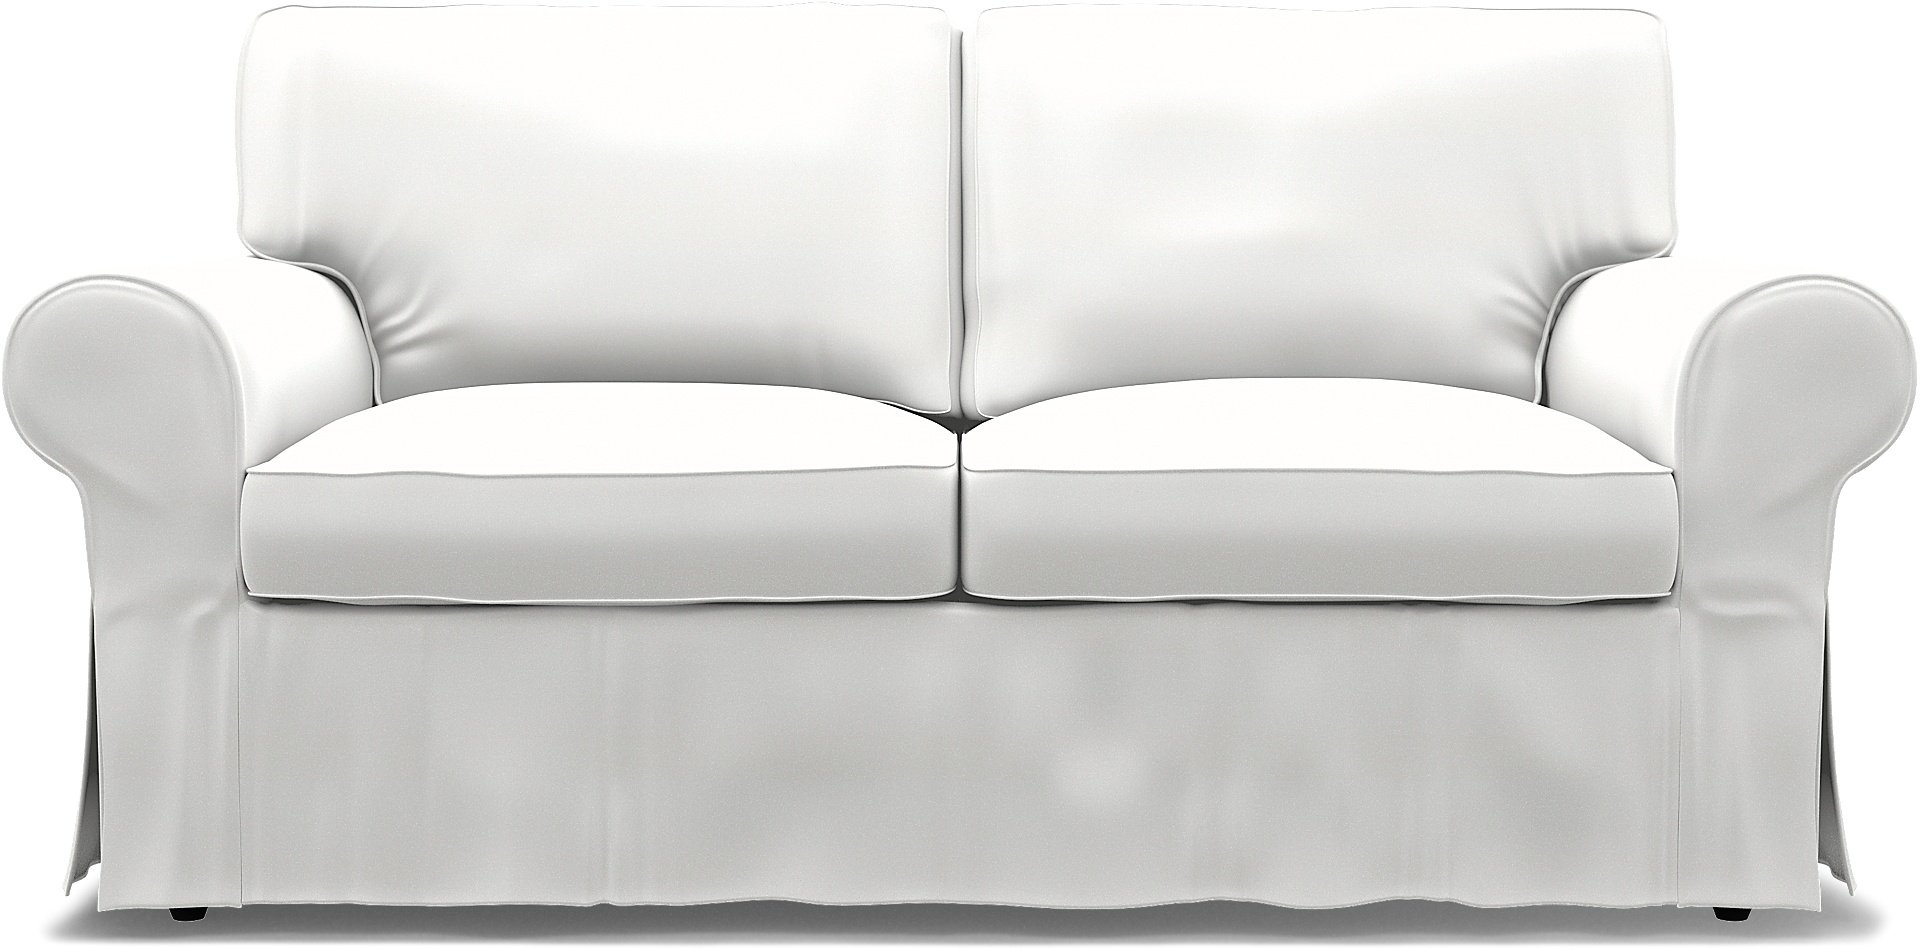 IKEA - Ektorp 2 Seater Sofa Bed Cover, Absolute White, Linen - Bemz